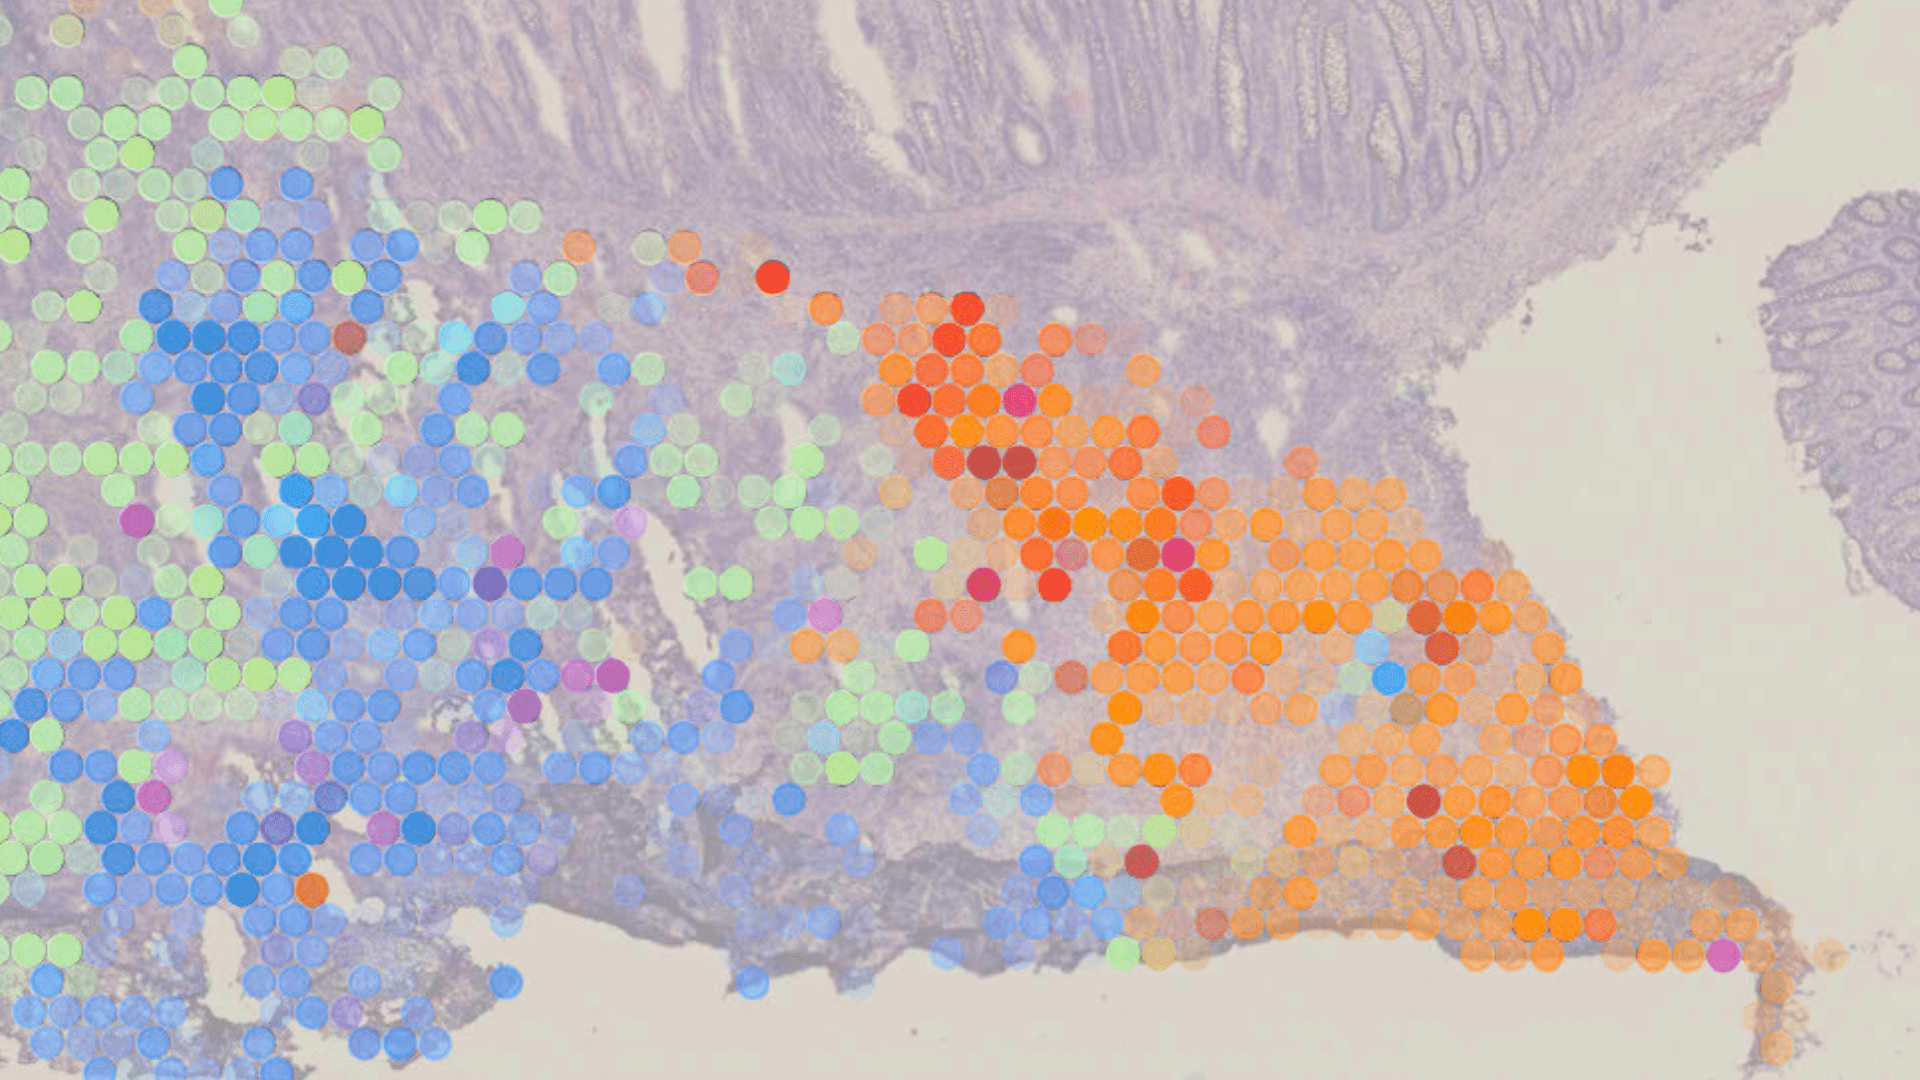 Coloured circles show cancer cell states mapped onto a tissue sample from a patient with bowel cancer.